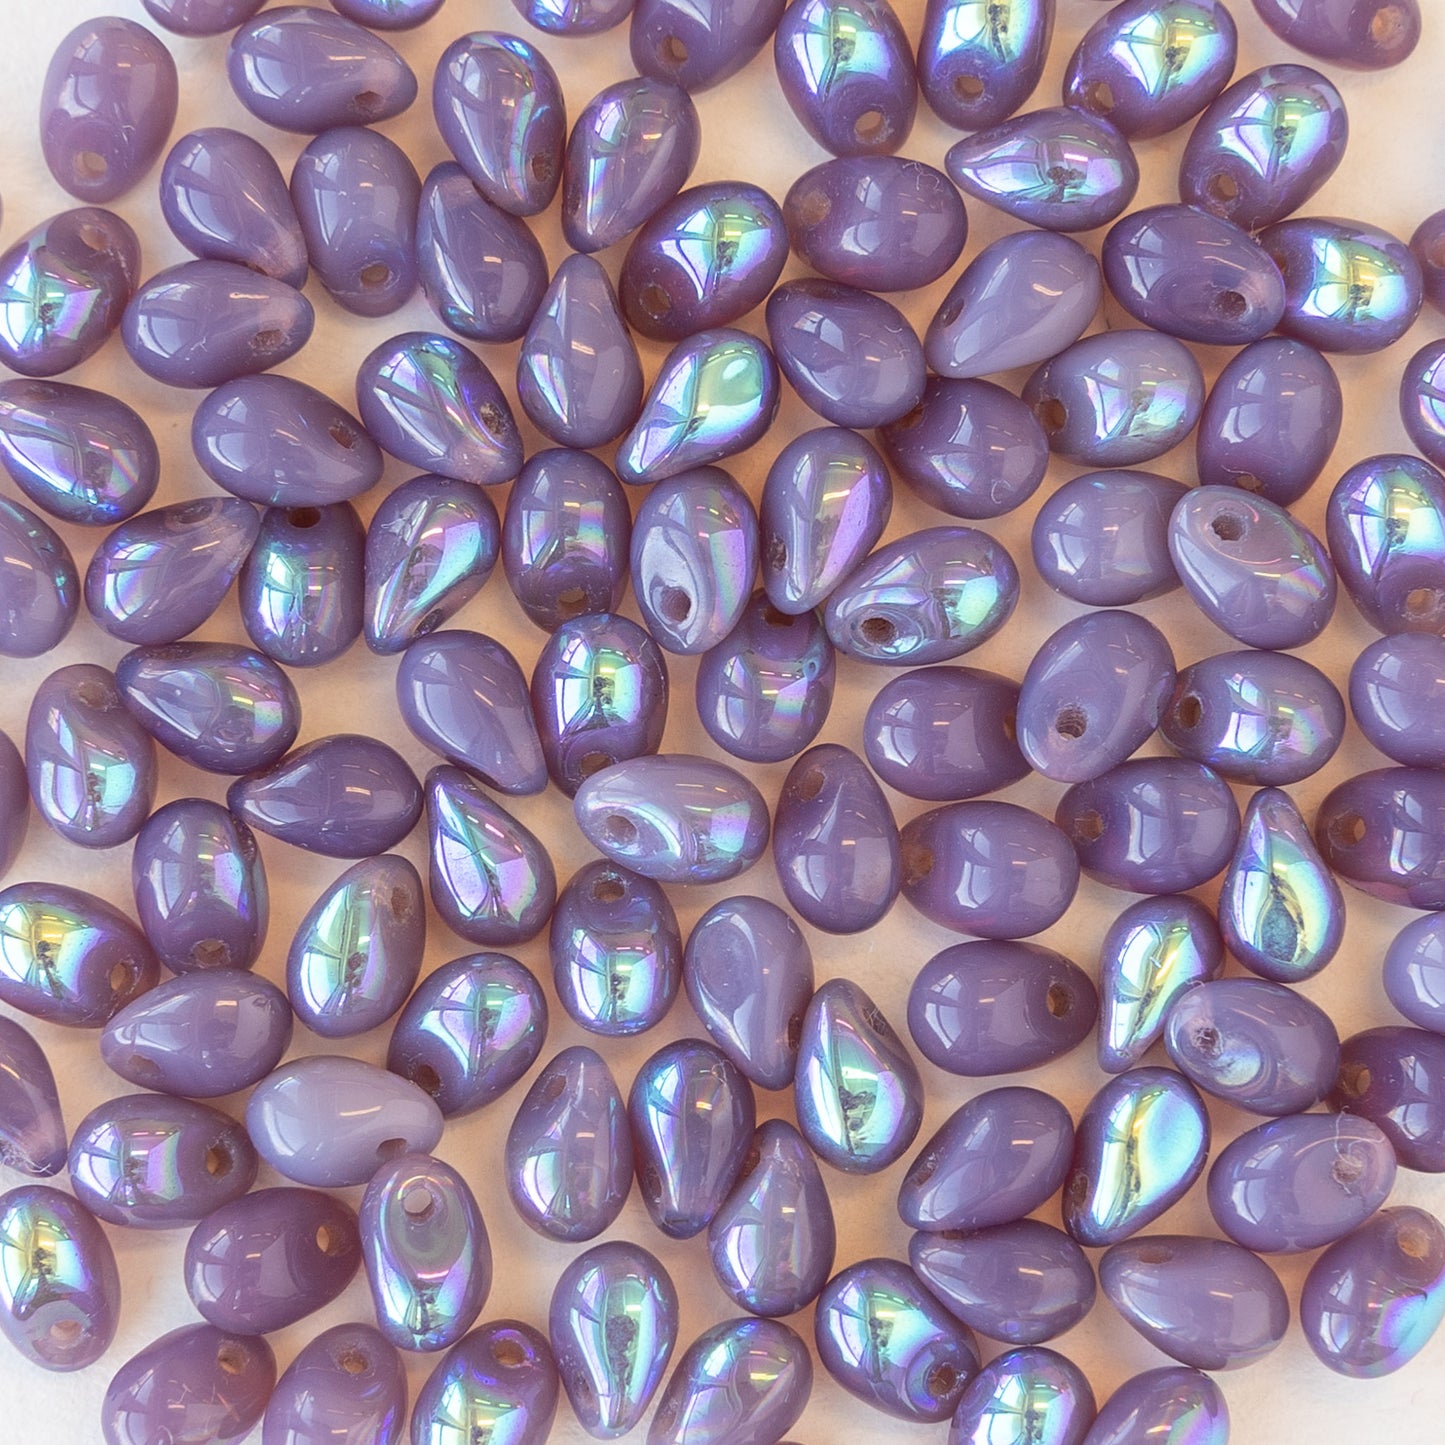 Load image into Gallery viewer, 4x6mm Glass Teardrops - Opaque Lavender AB - 100 Beads
